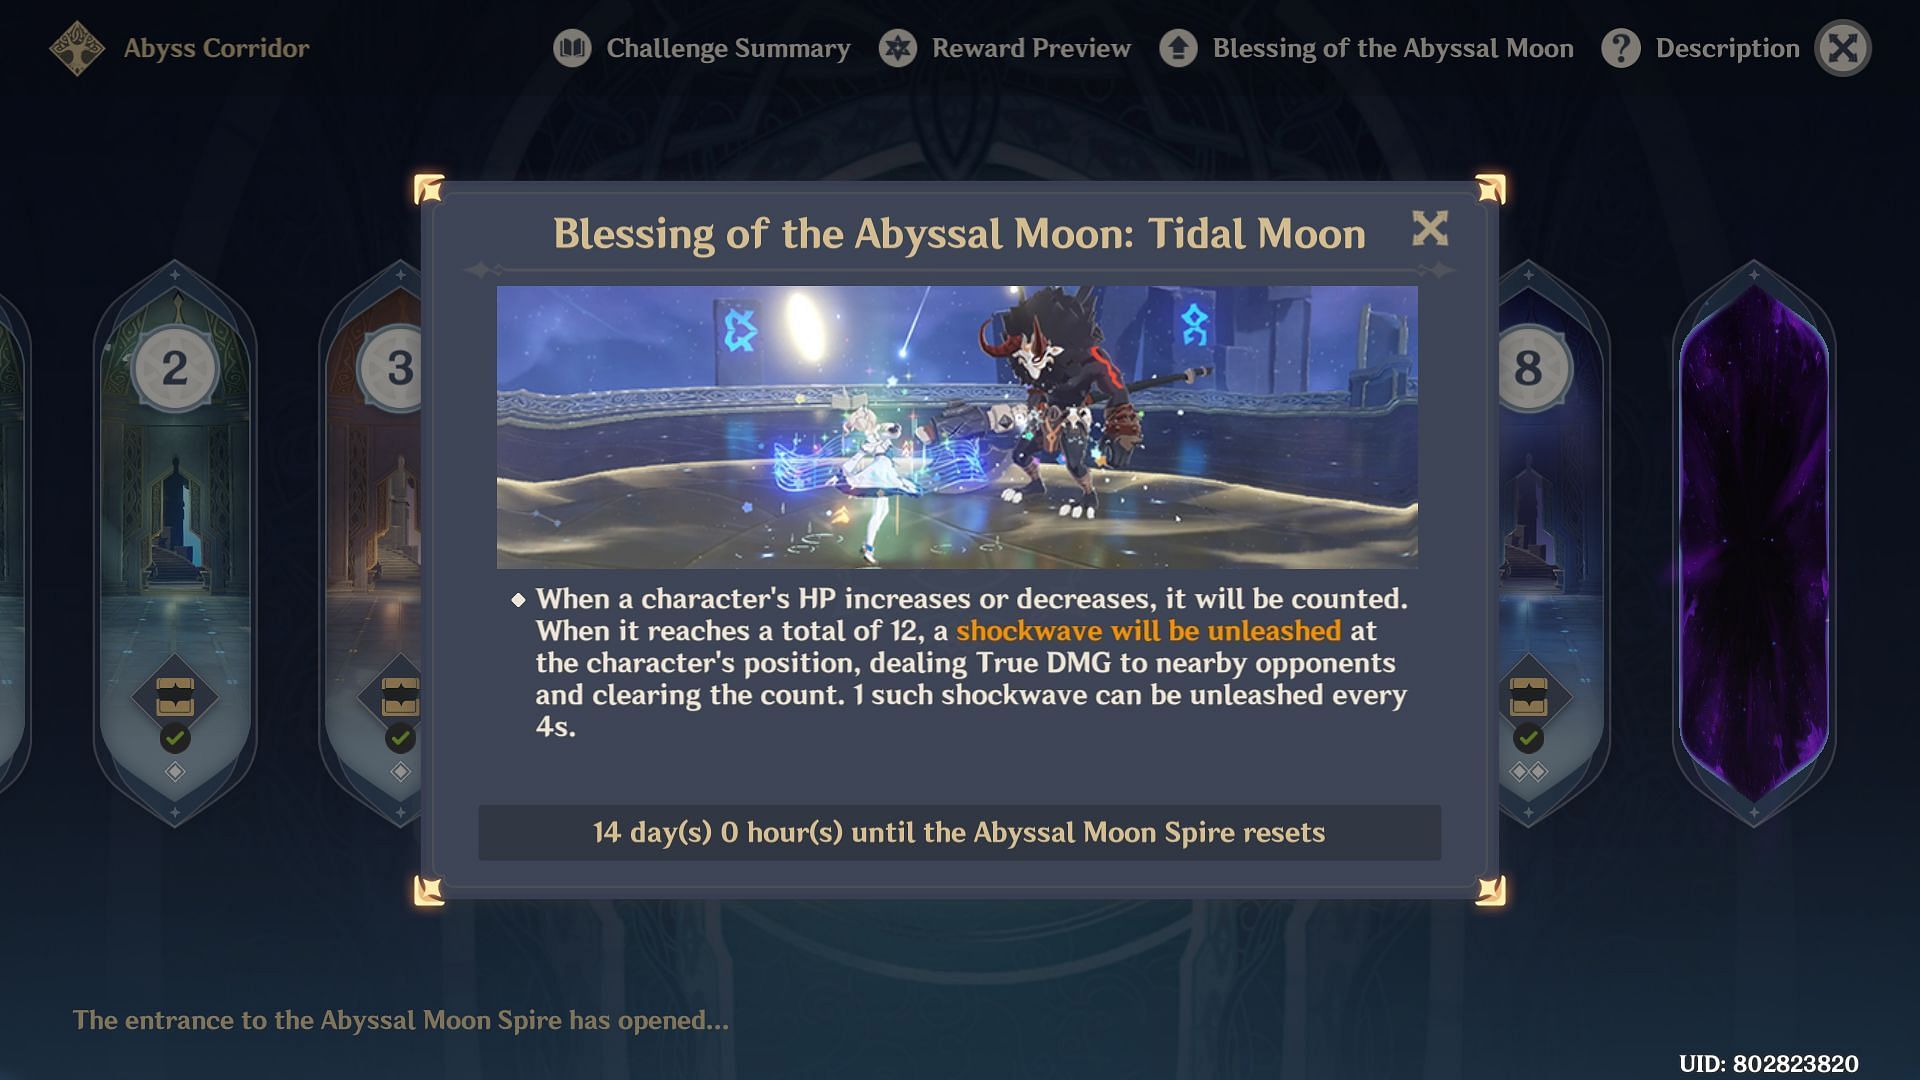 Blessing of the Abyssal Moon (Image via Genshin Impact)